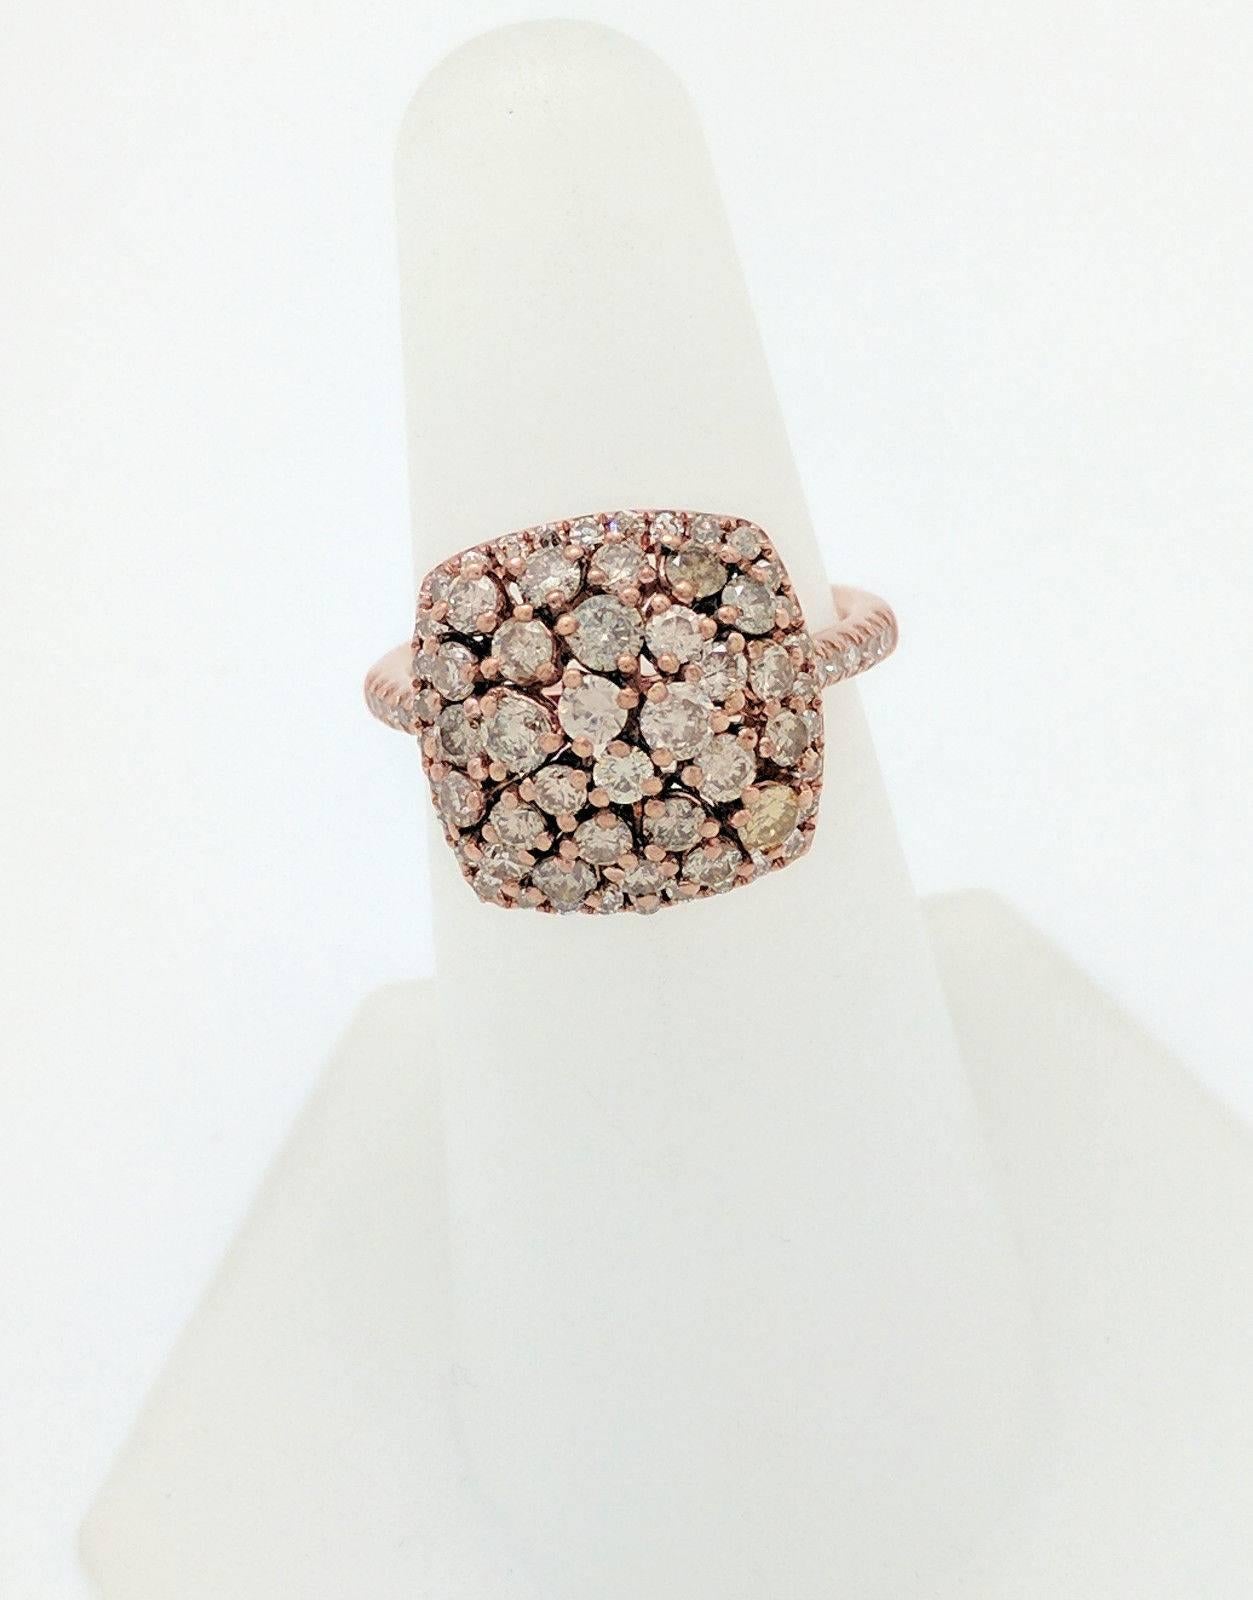 You are viewing a beautiful Champagne Diamond Ring. This ring is crafted from 14k rose gold and weigh 6 grams. This ring features 59 round natural champagne diamonds for an estimated 2 carats total weight. This ring is currently a size 6.5, and can